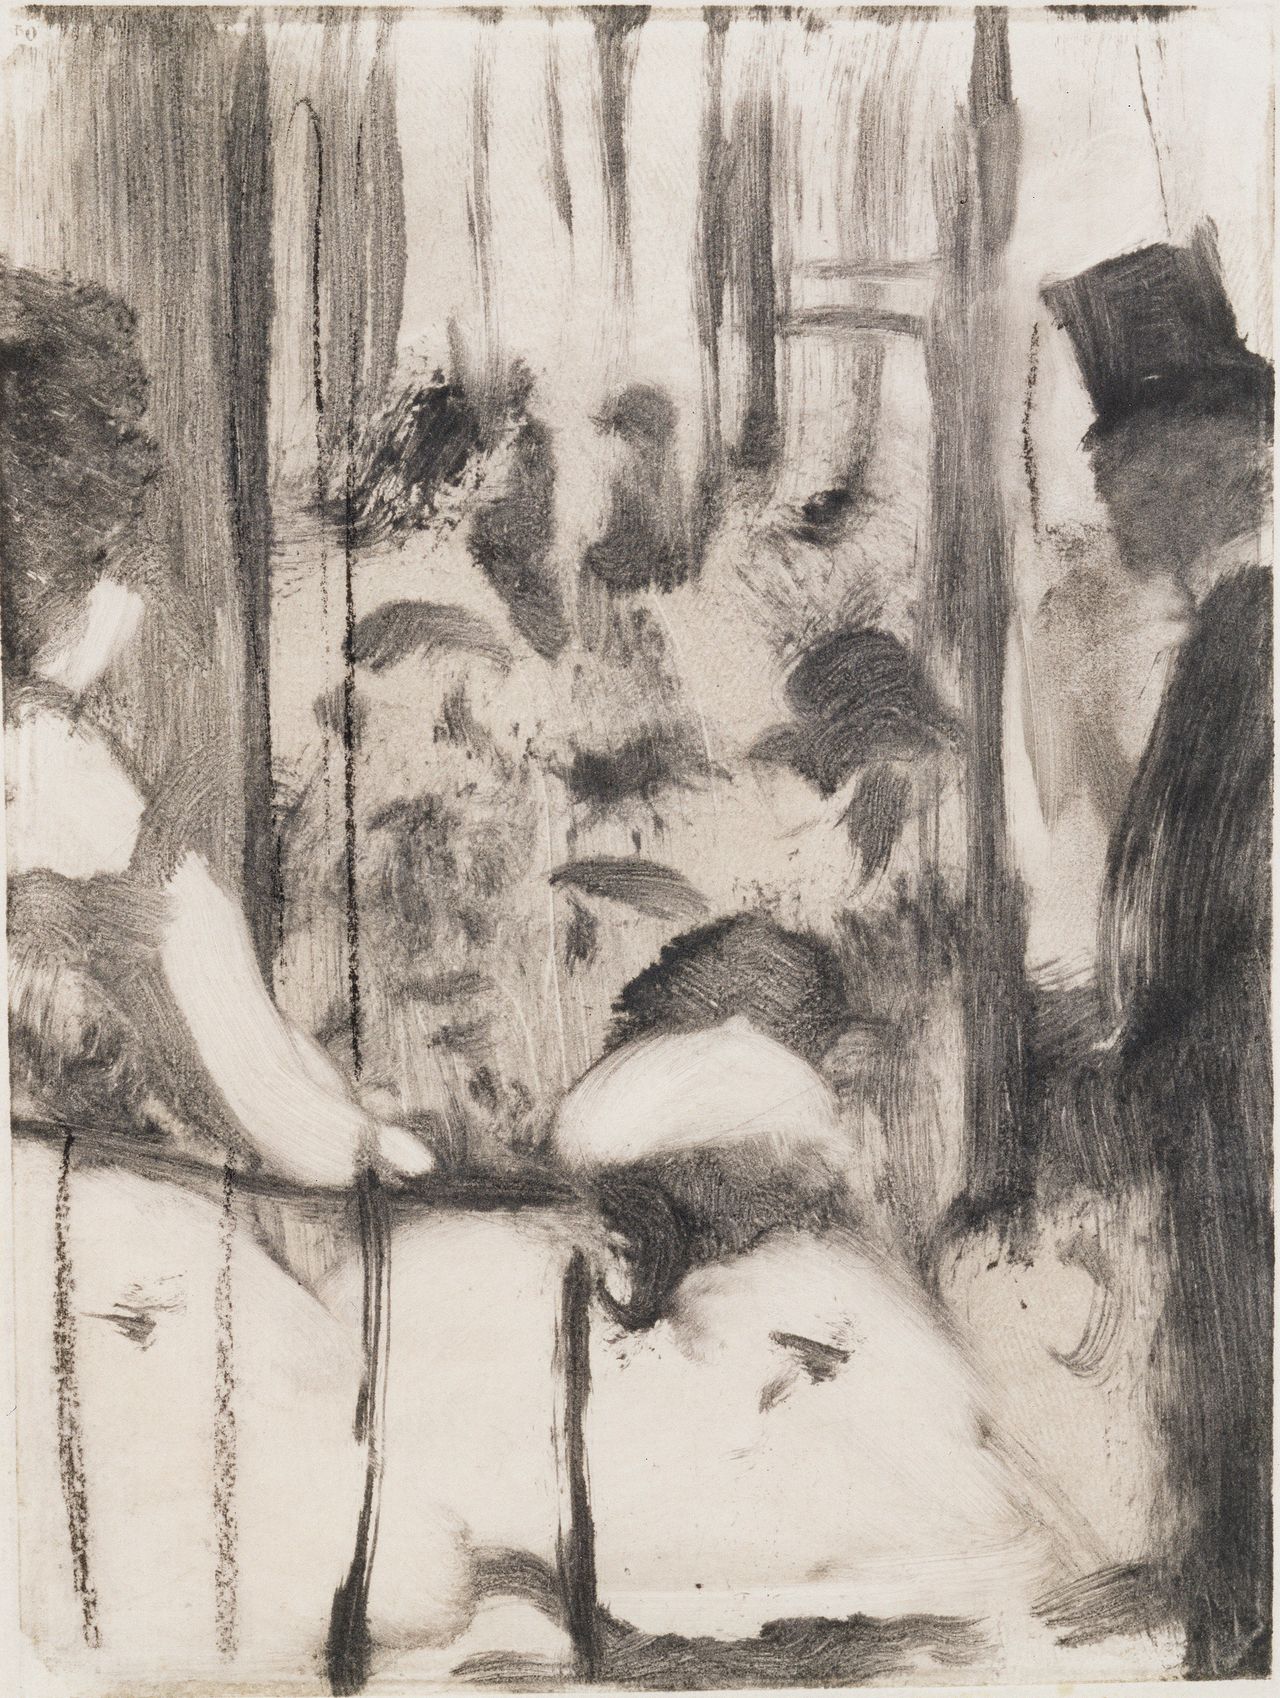 Edgar Degas (French, 1834–1917). Dancers Coming from the Dressing Rooms onto the Stage (Et ces demoiselles fretillaient gentiment devant la glace du foyer), c. 1876–77. Proposed illustration for The Cardinal Family (La Famille Cardinal). Pastel over monotype on paper. Plate: 8 3/8 × 6 1/4 in. (21.2 × 15.8 cm). Schorr Collection.